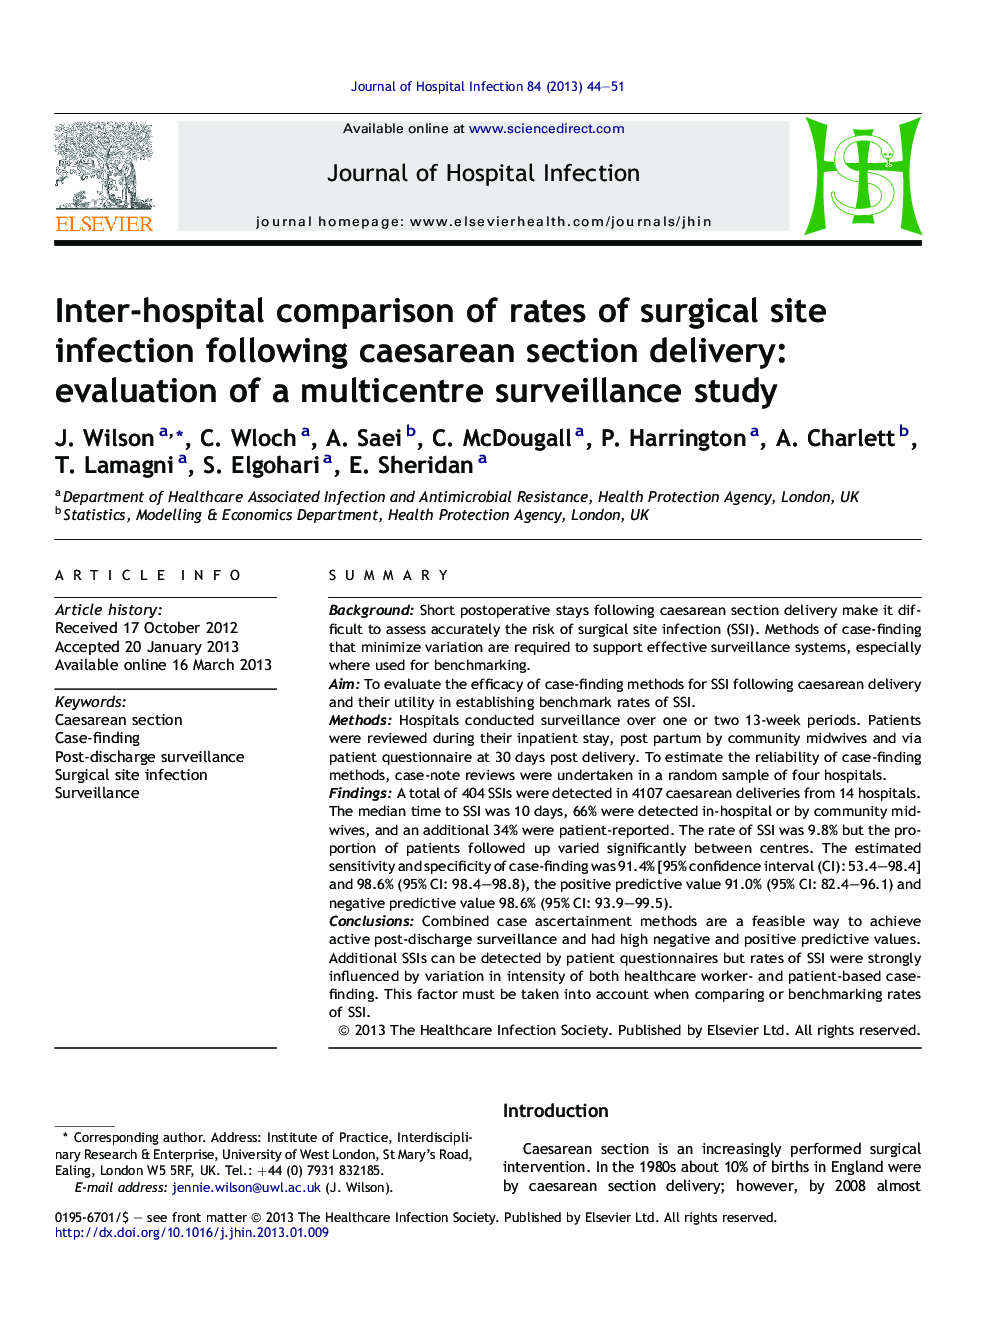 Inter-hospital comparison of rates of surgical site infection following caesarean section delivery: evaluation of a multicentre surveillance study